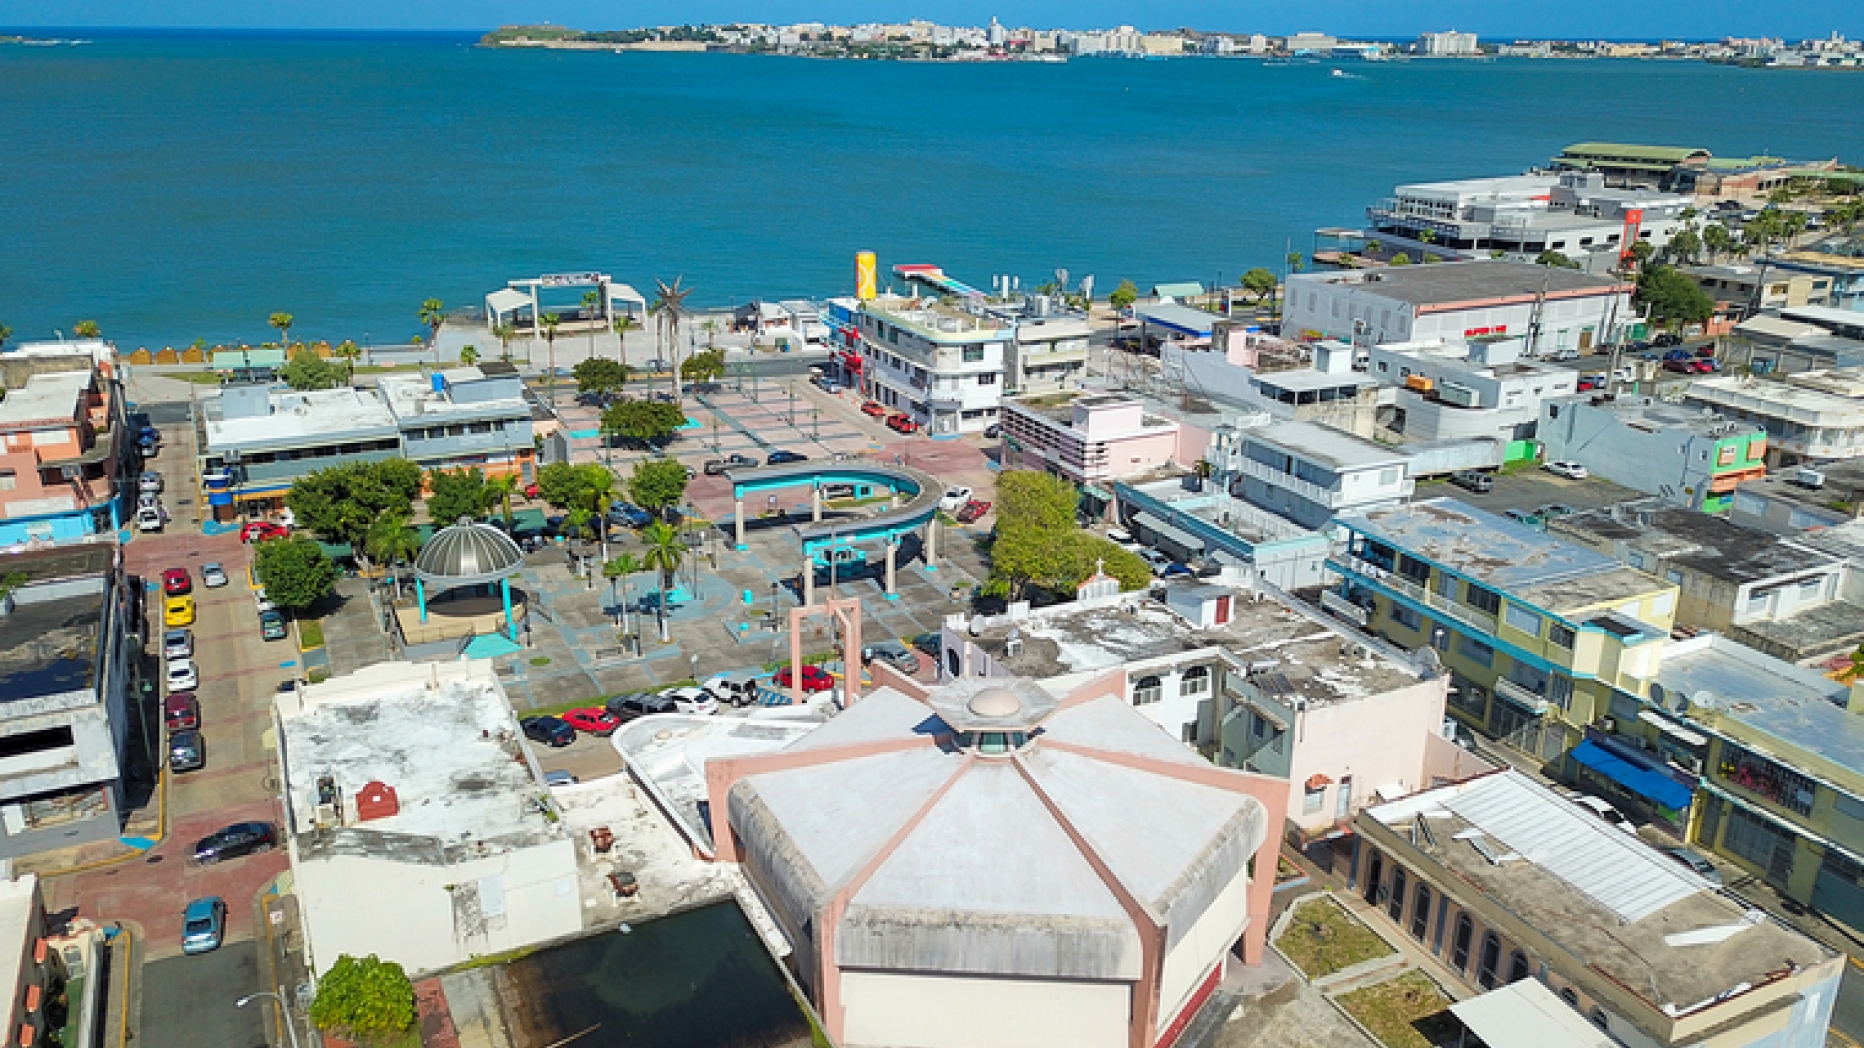 View of The Del Carmen Church from above in front of a plaza & the San Juan bay. 